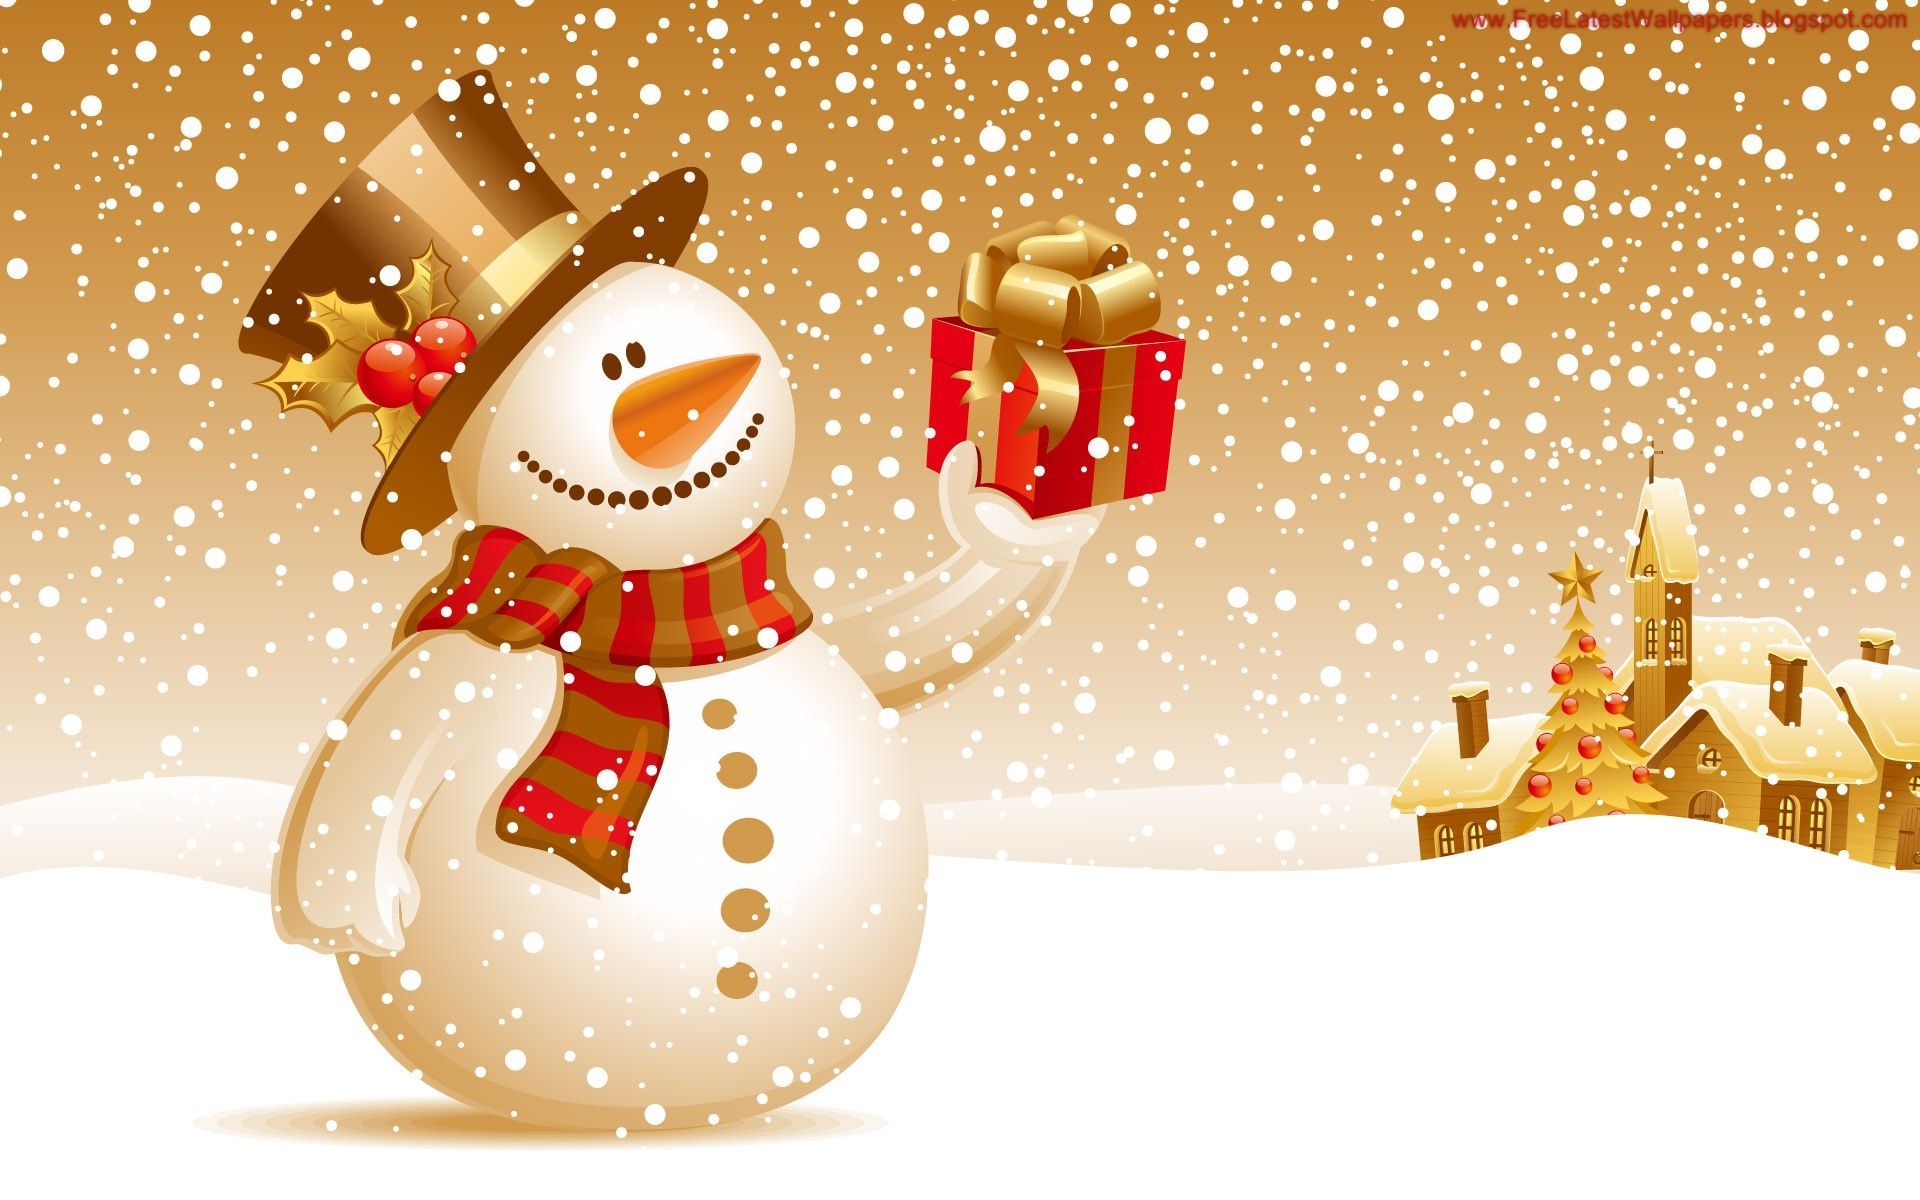 Christmas Archives - Free wallpaper full hd 1080p, high definition ...